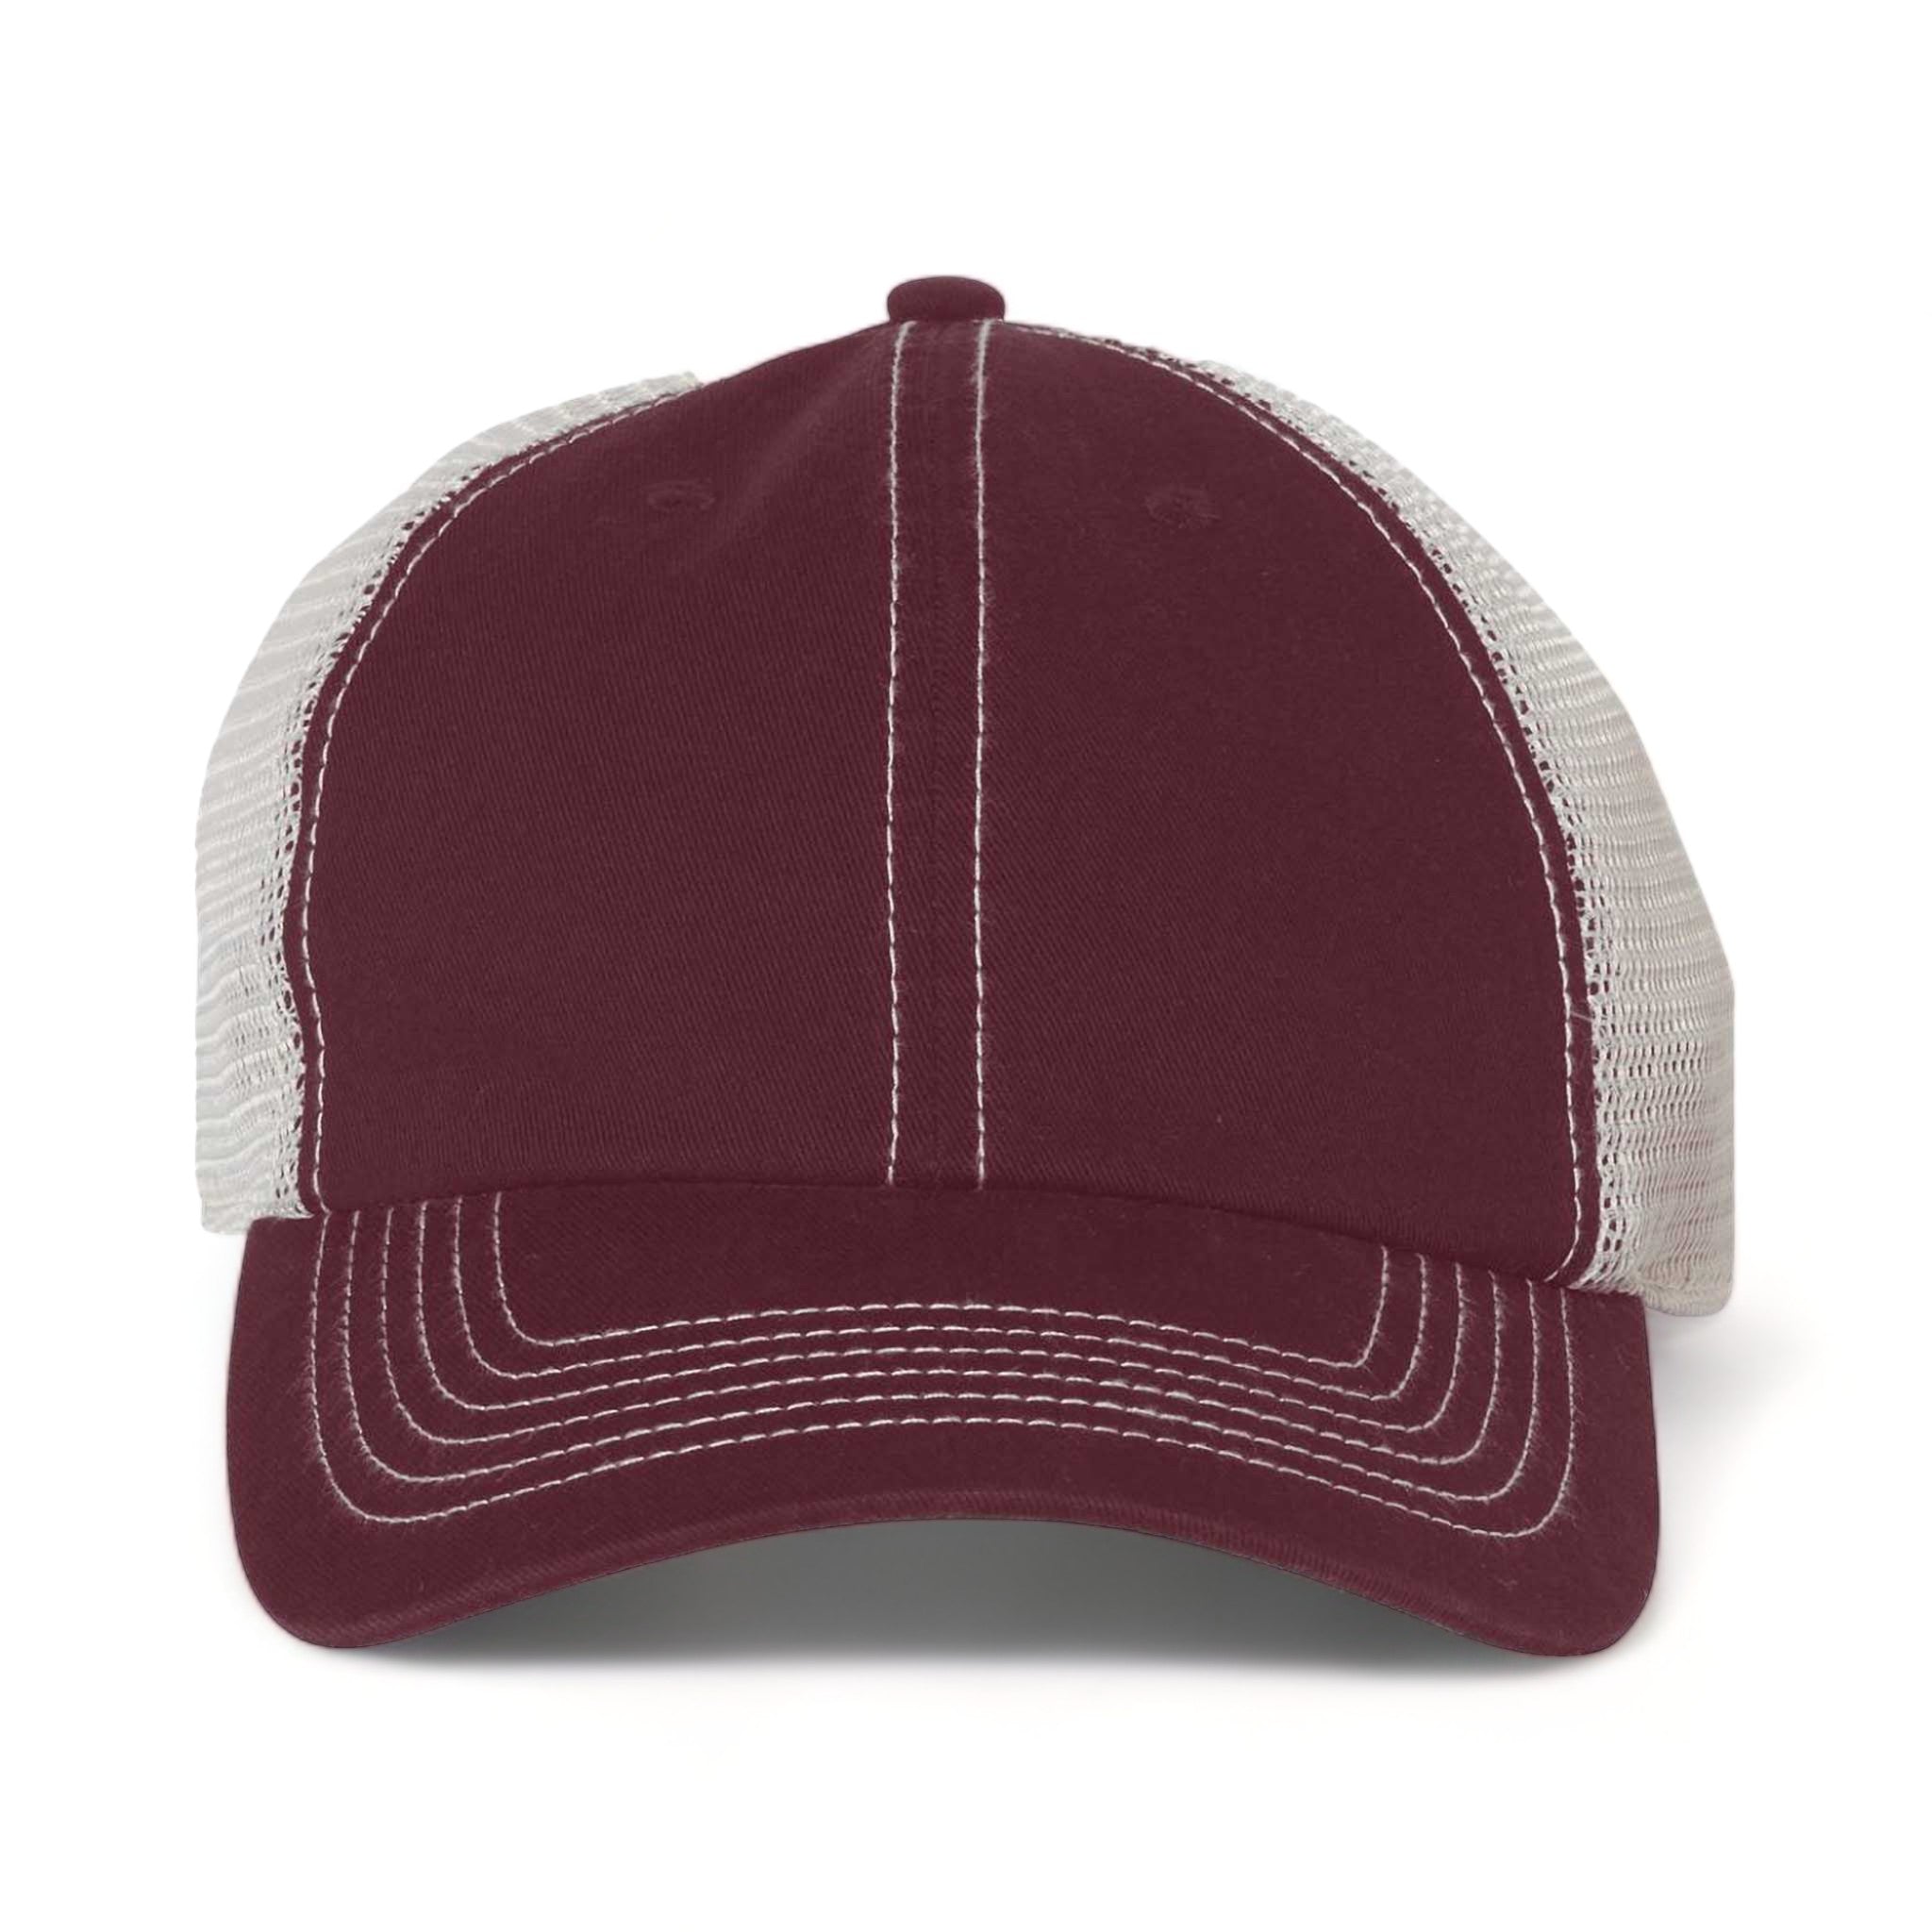 Front view of 47 Brand 4710 custom hat in dark maroon and stone